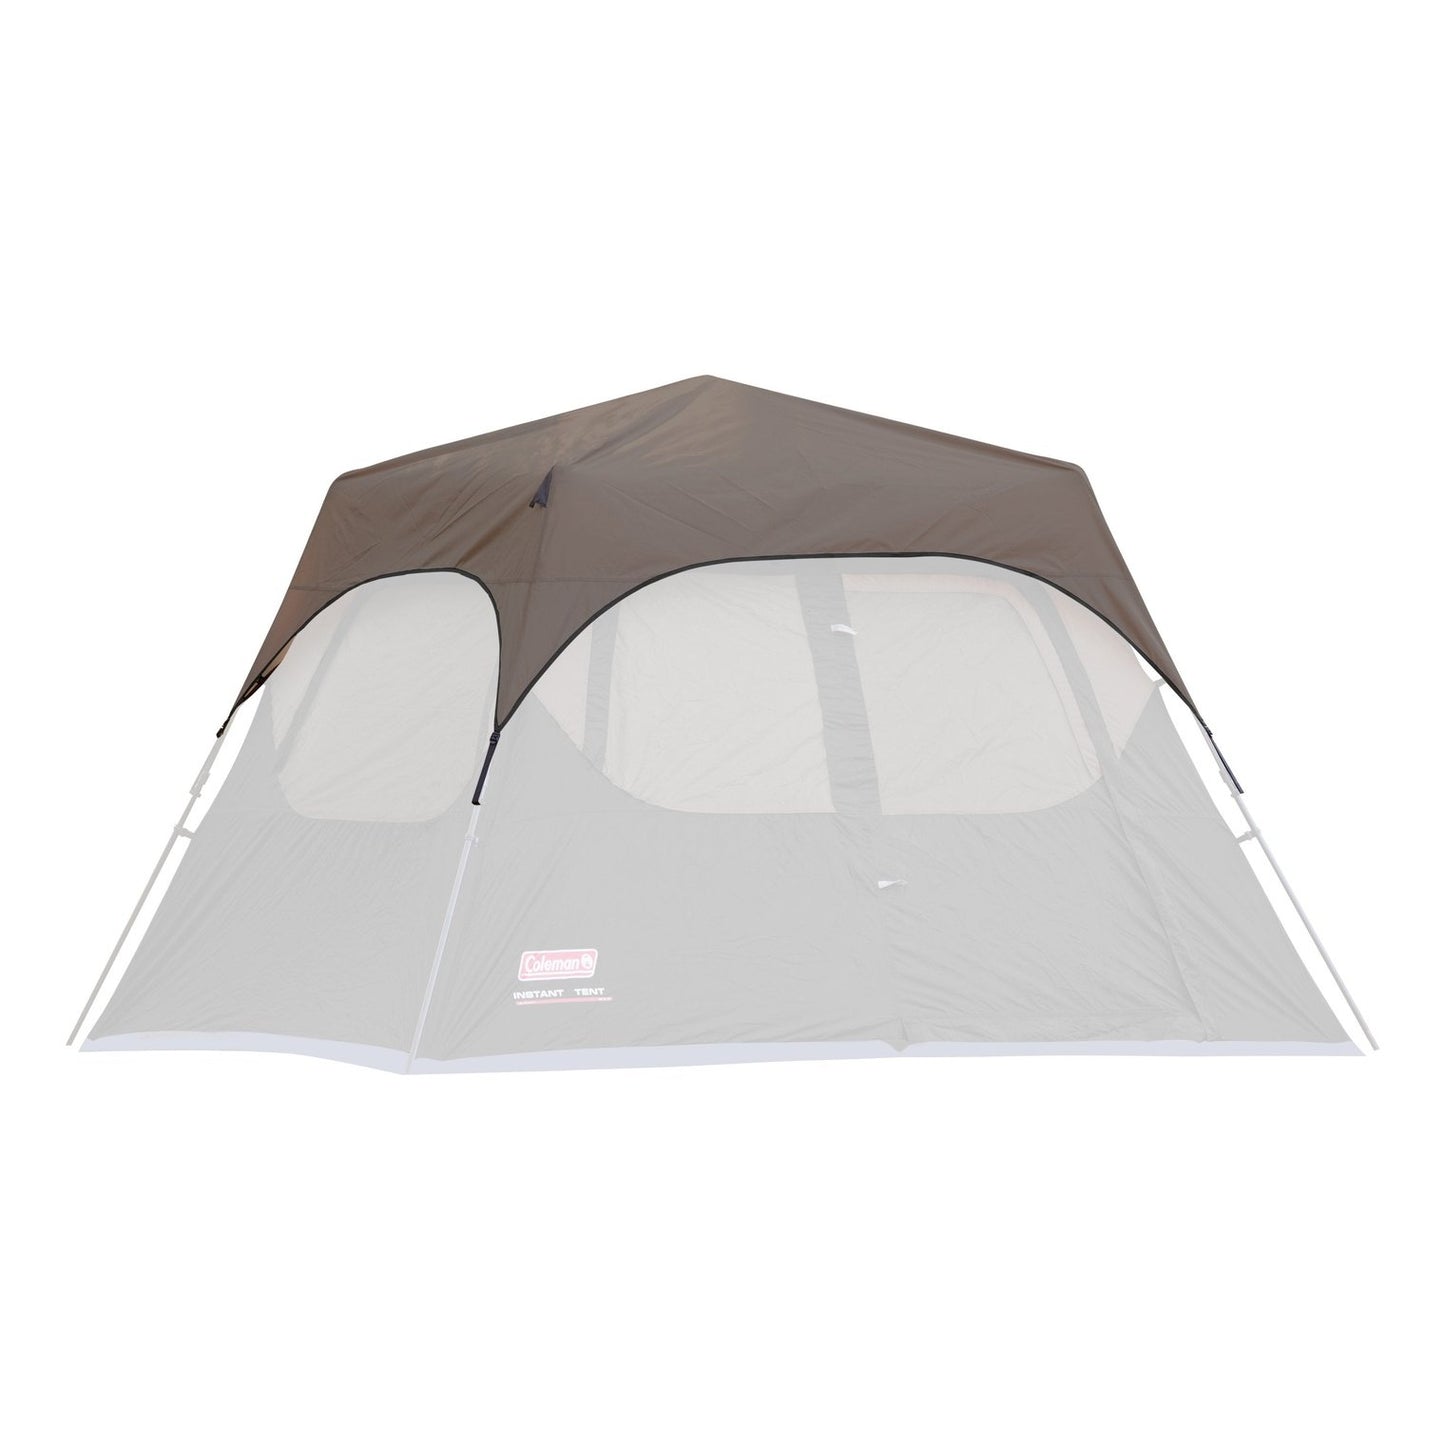 Coleman Rainfly Accessory for Instant Camping Tent 6 Person Tent